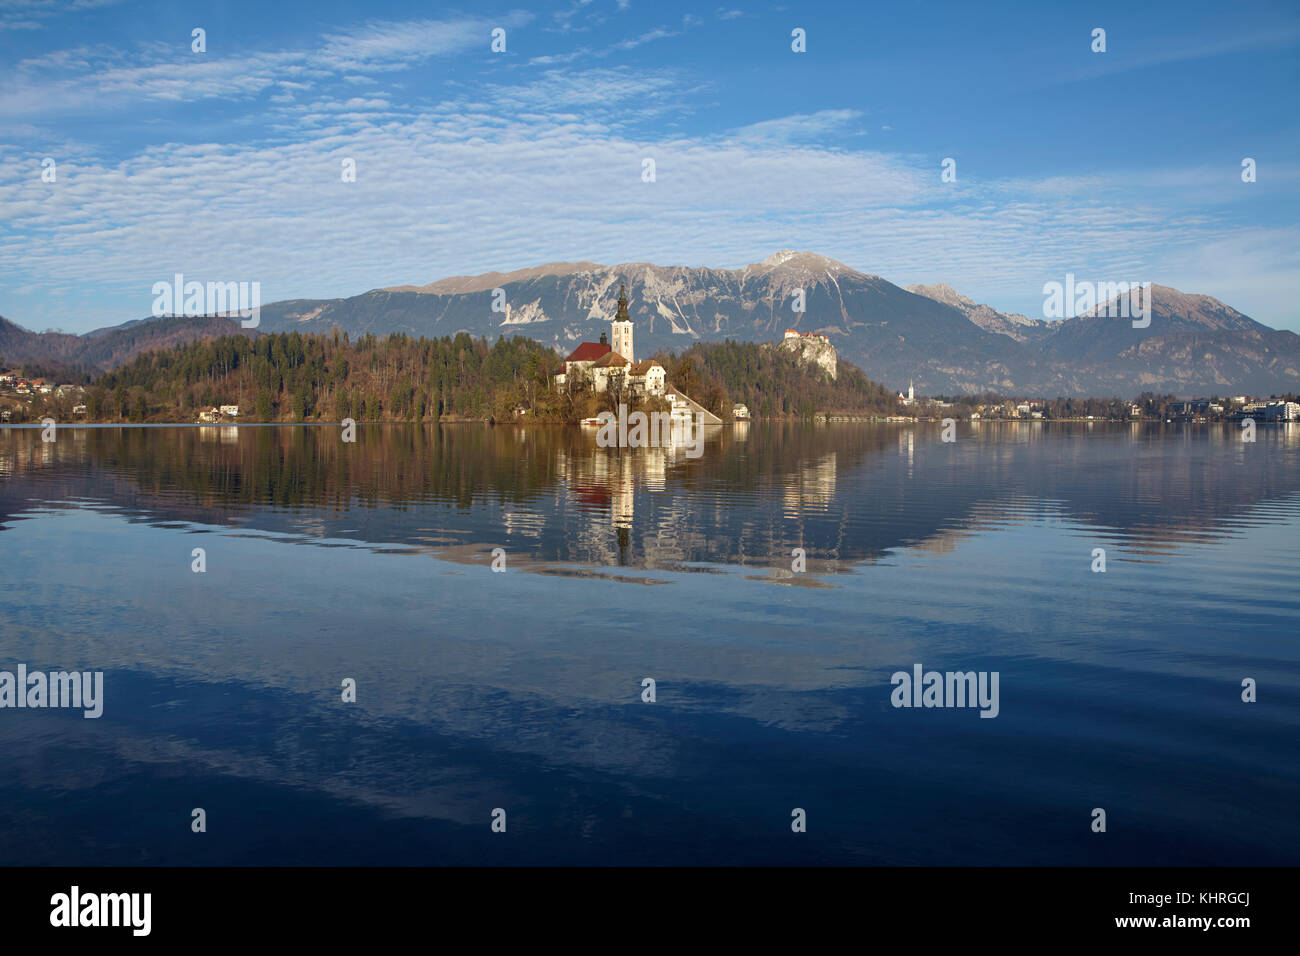 View of Lake Bled and the Church of Mary the Queen, located on a small island in the middle of the lake, Bled, Slovenia Stock Photo